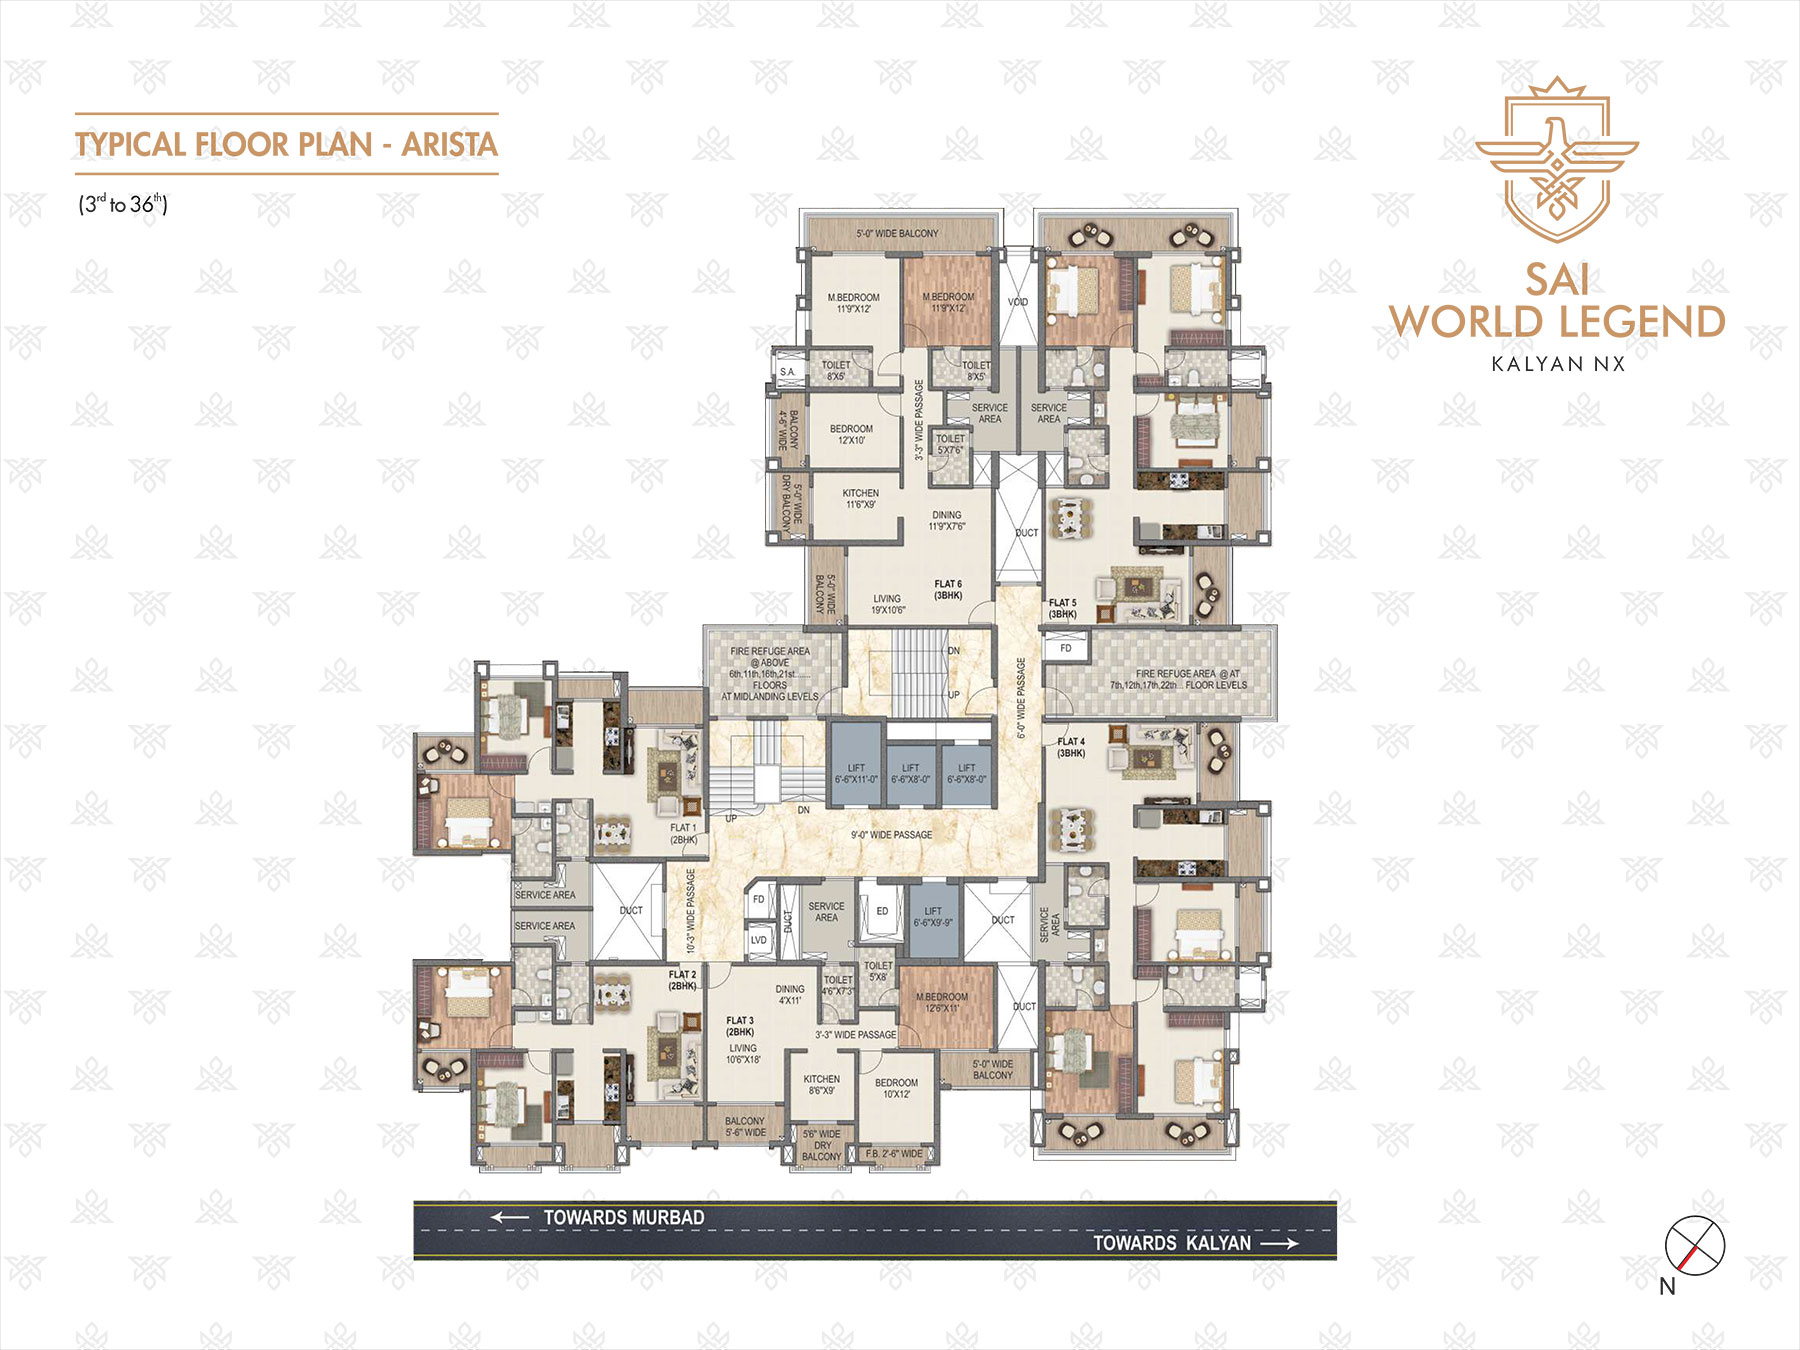 TYPICAL FLOOR PLAN ARISTA 3rd to 36th